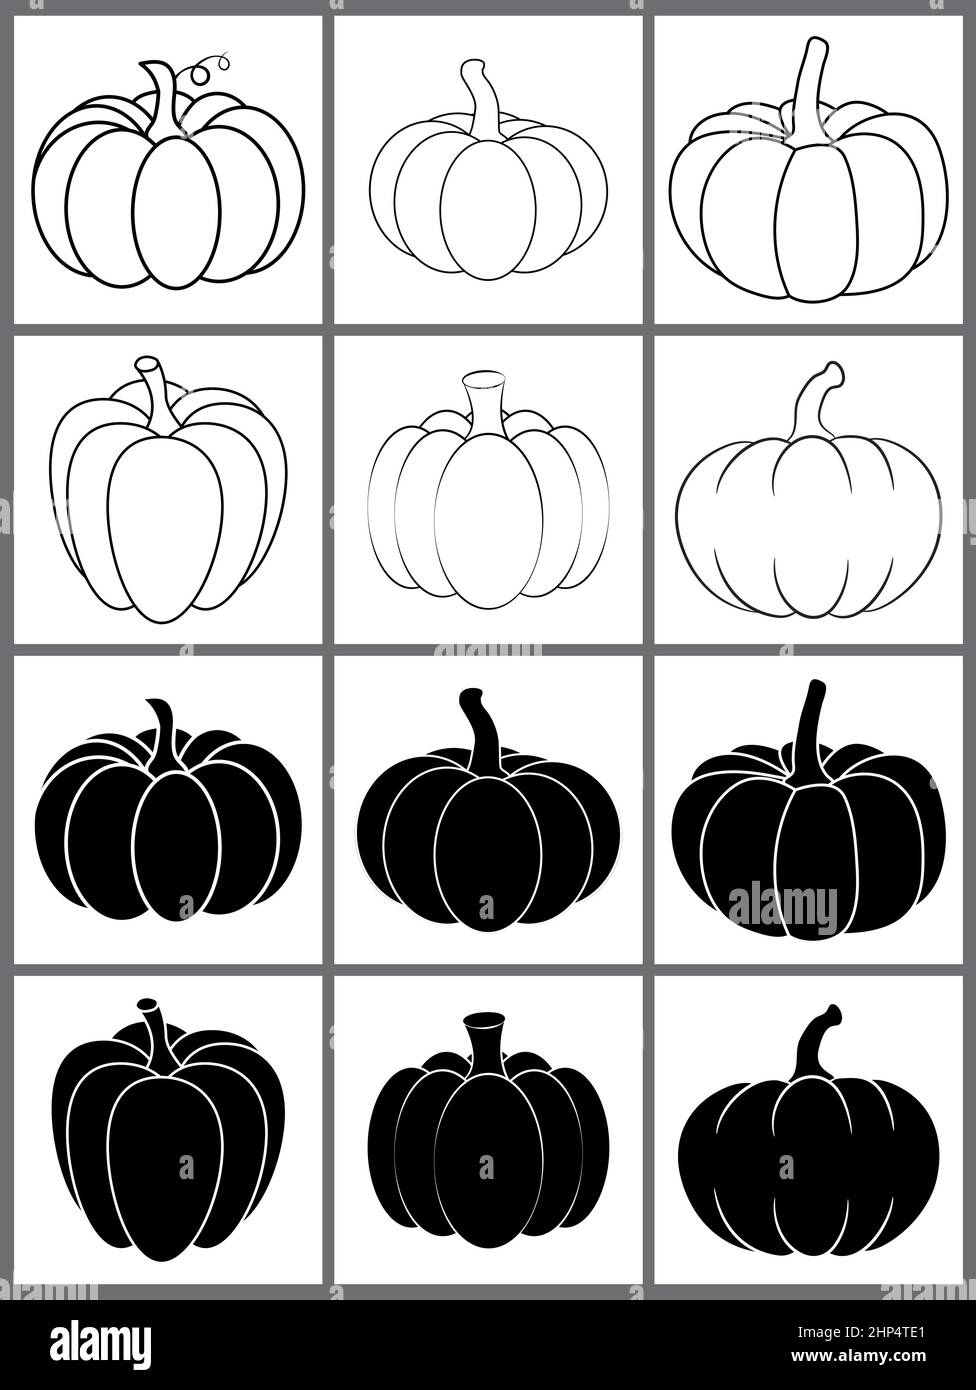 Pumpkin outline and silhouette icon set for autumn. Halloween contour and black shape vegetable design. Vector illustration isolated on white background. Stock Vector